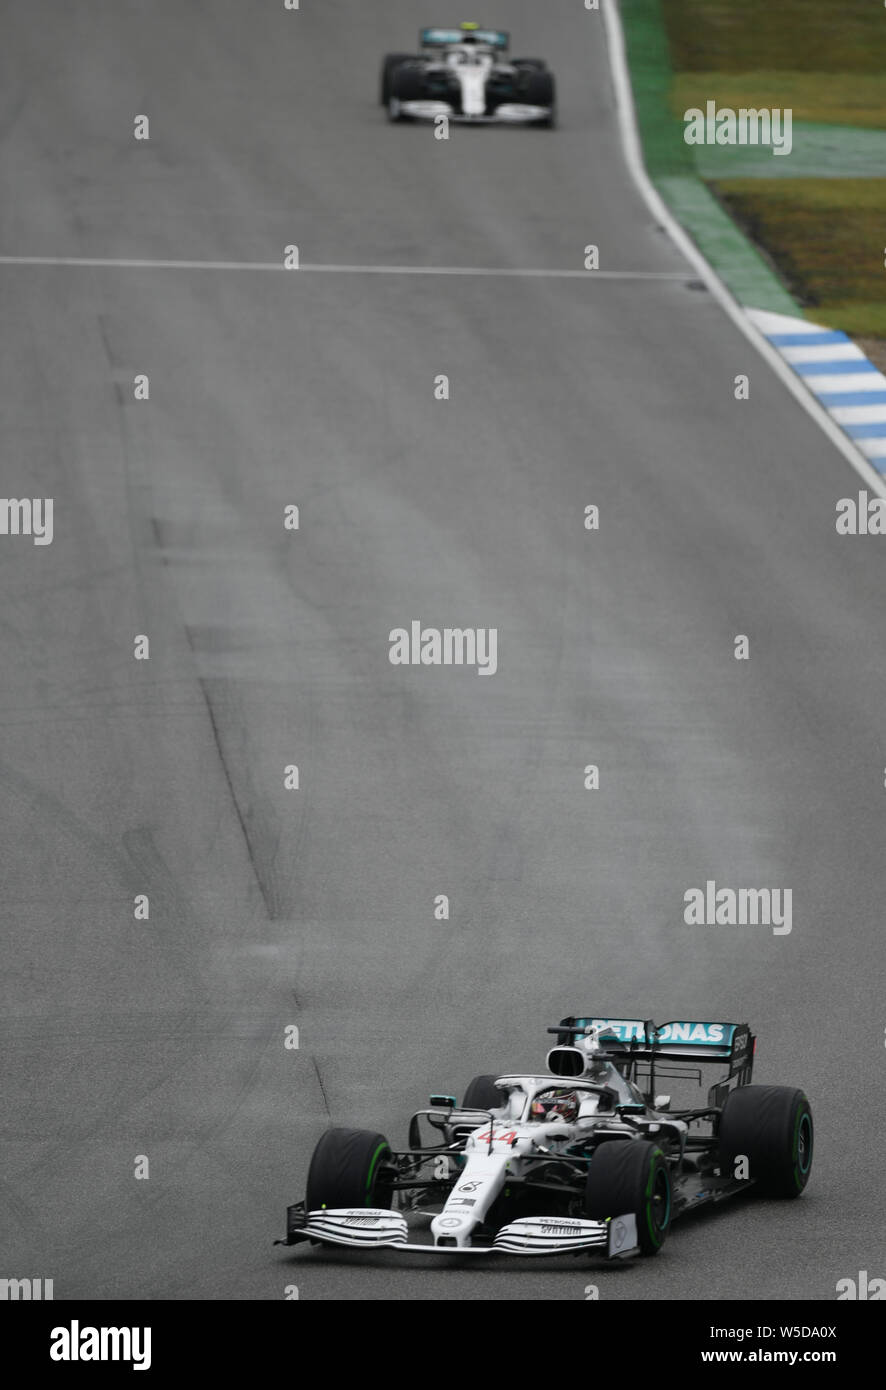 Hockenheim, Germany. 28th July, 2019. Motorsport: Formula 1 World Championship, Grand Prix of Germany. Lewis Hamilton from Great Britain of the Mercedes-AMG Petronas team drives across the track. Credit: Fabian Sommer/dpa/Alamy Live News Stock Photo